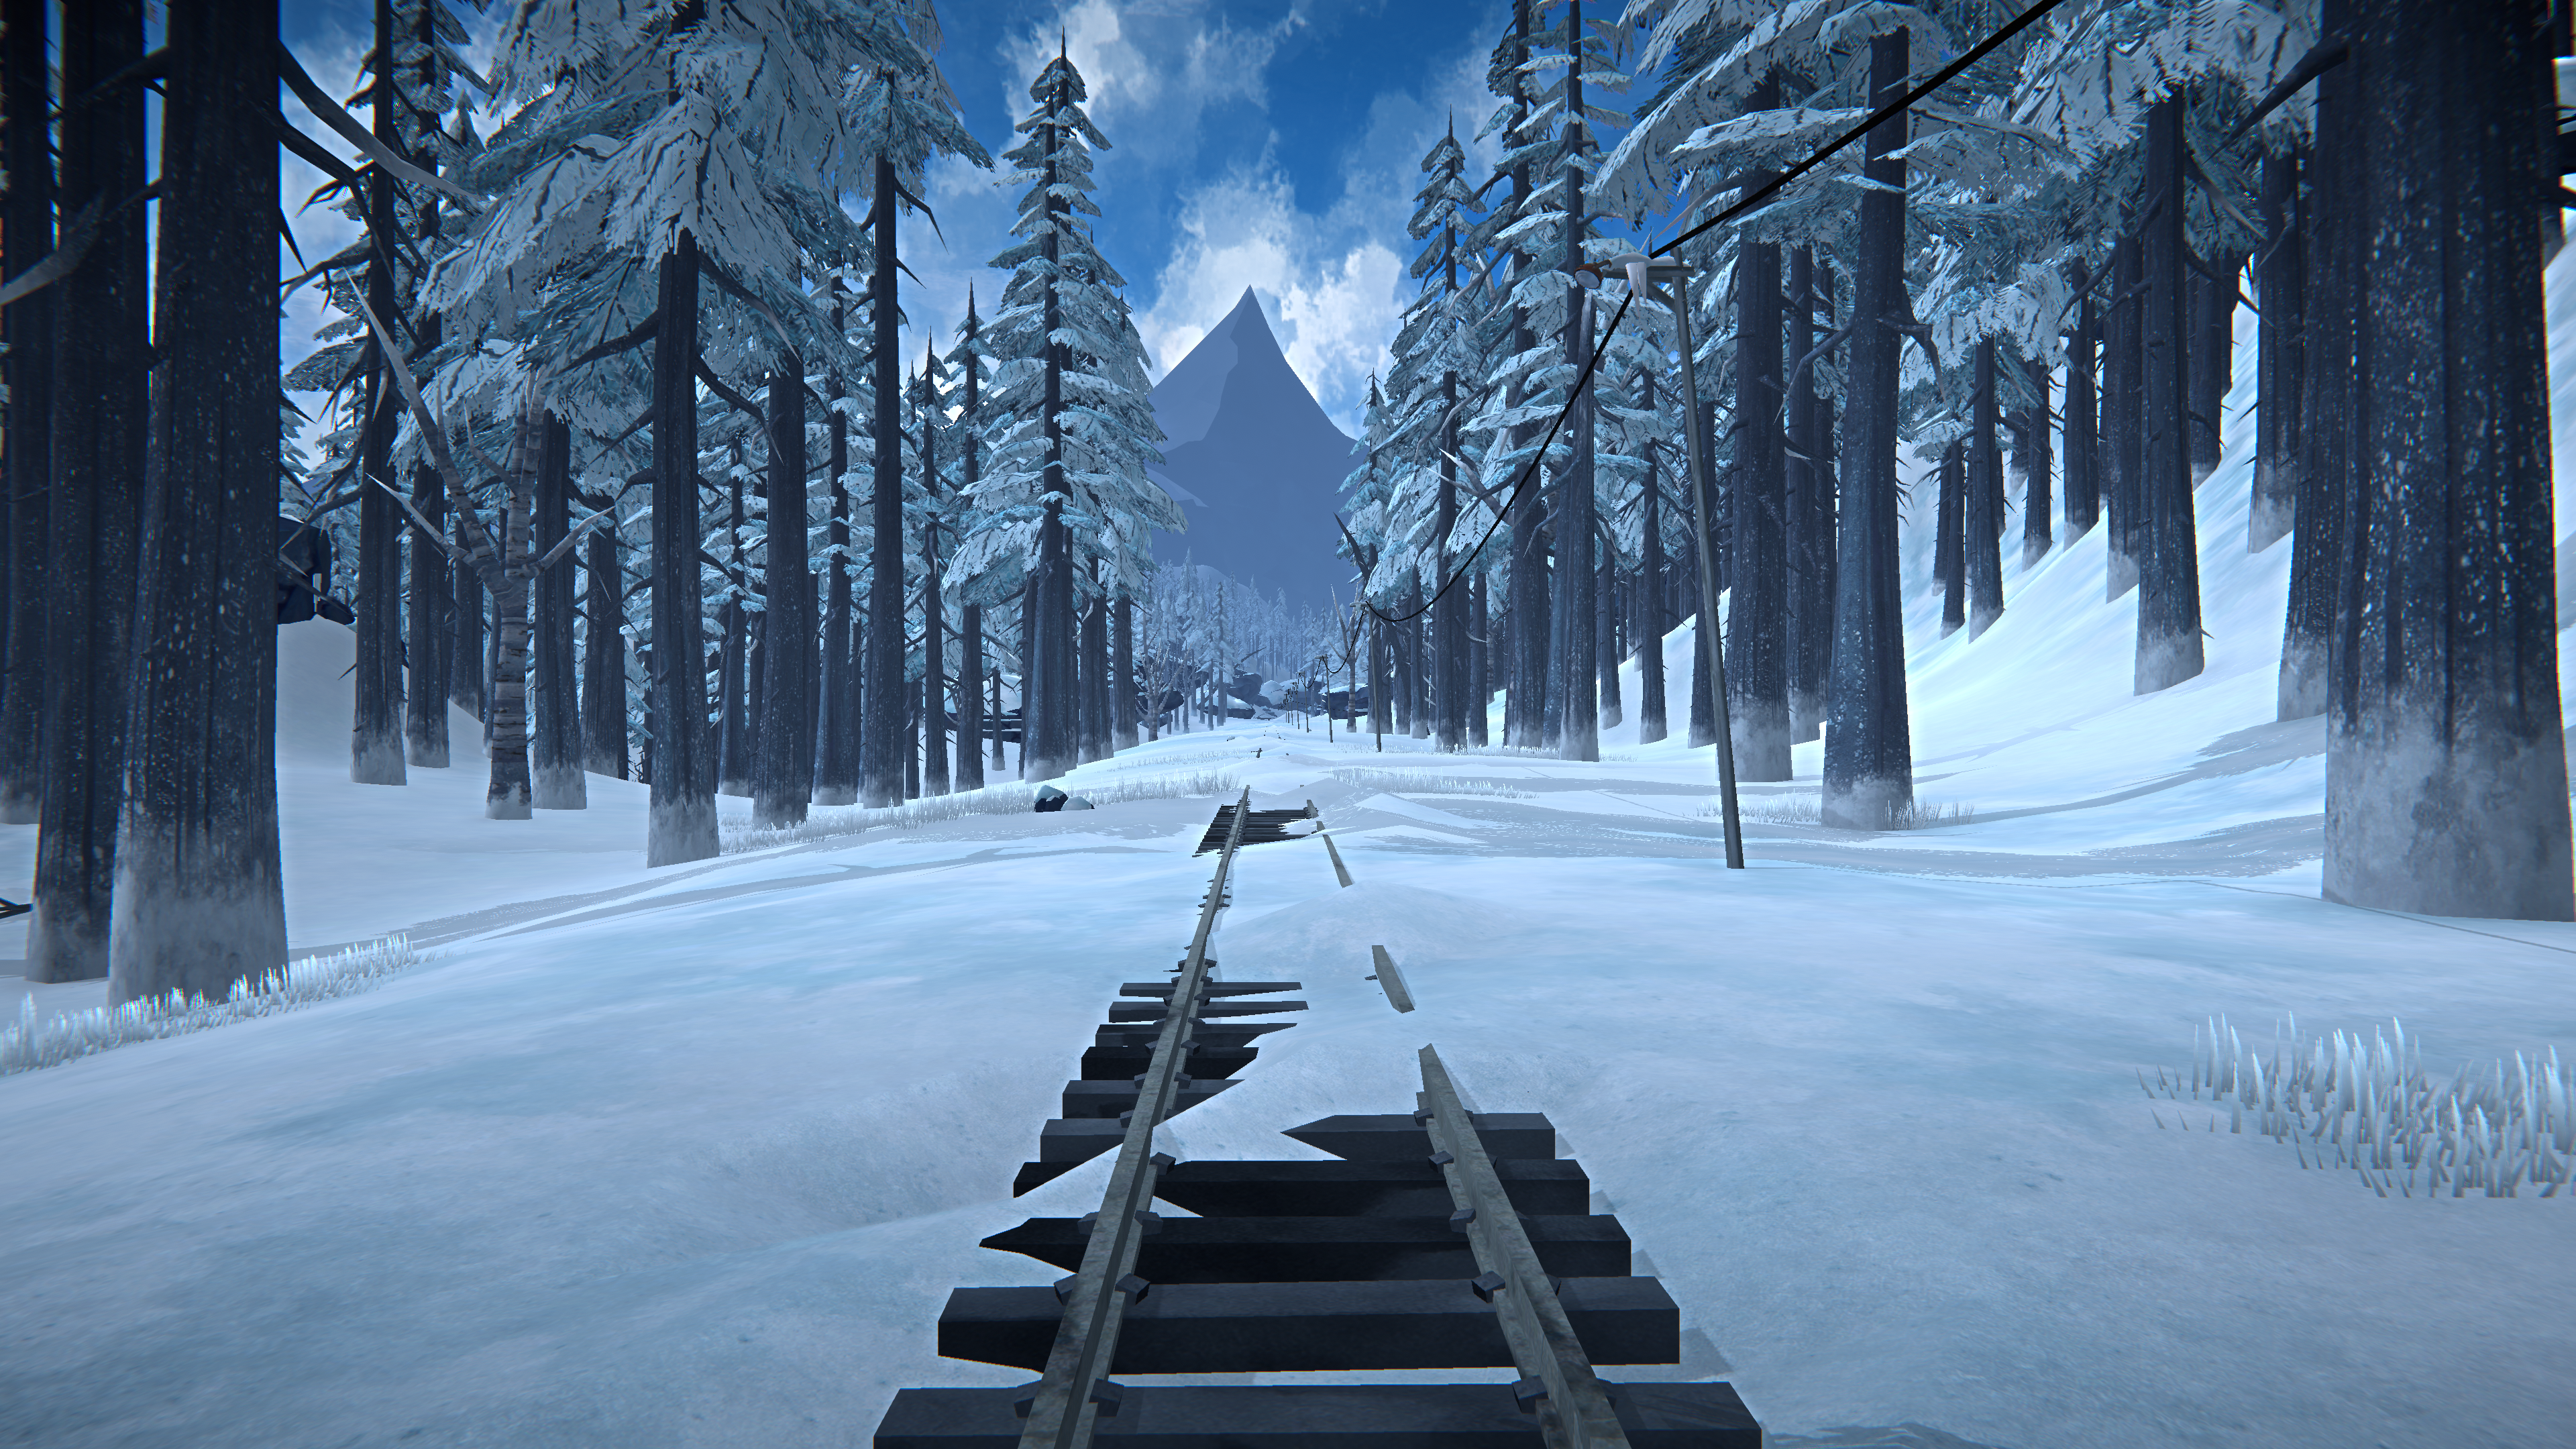 Video Game Landscape Video Games Screen Shot The Long Dark Snow PC Gaming Survival Trees Nature Vide 3840x2160